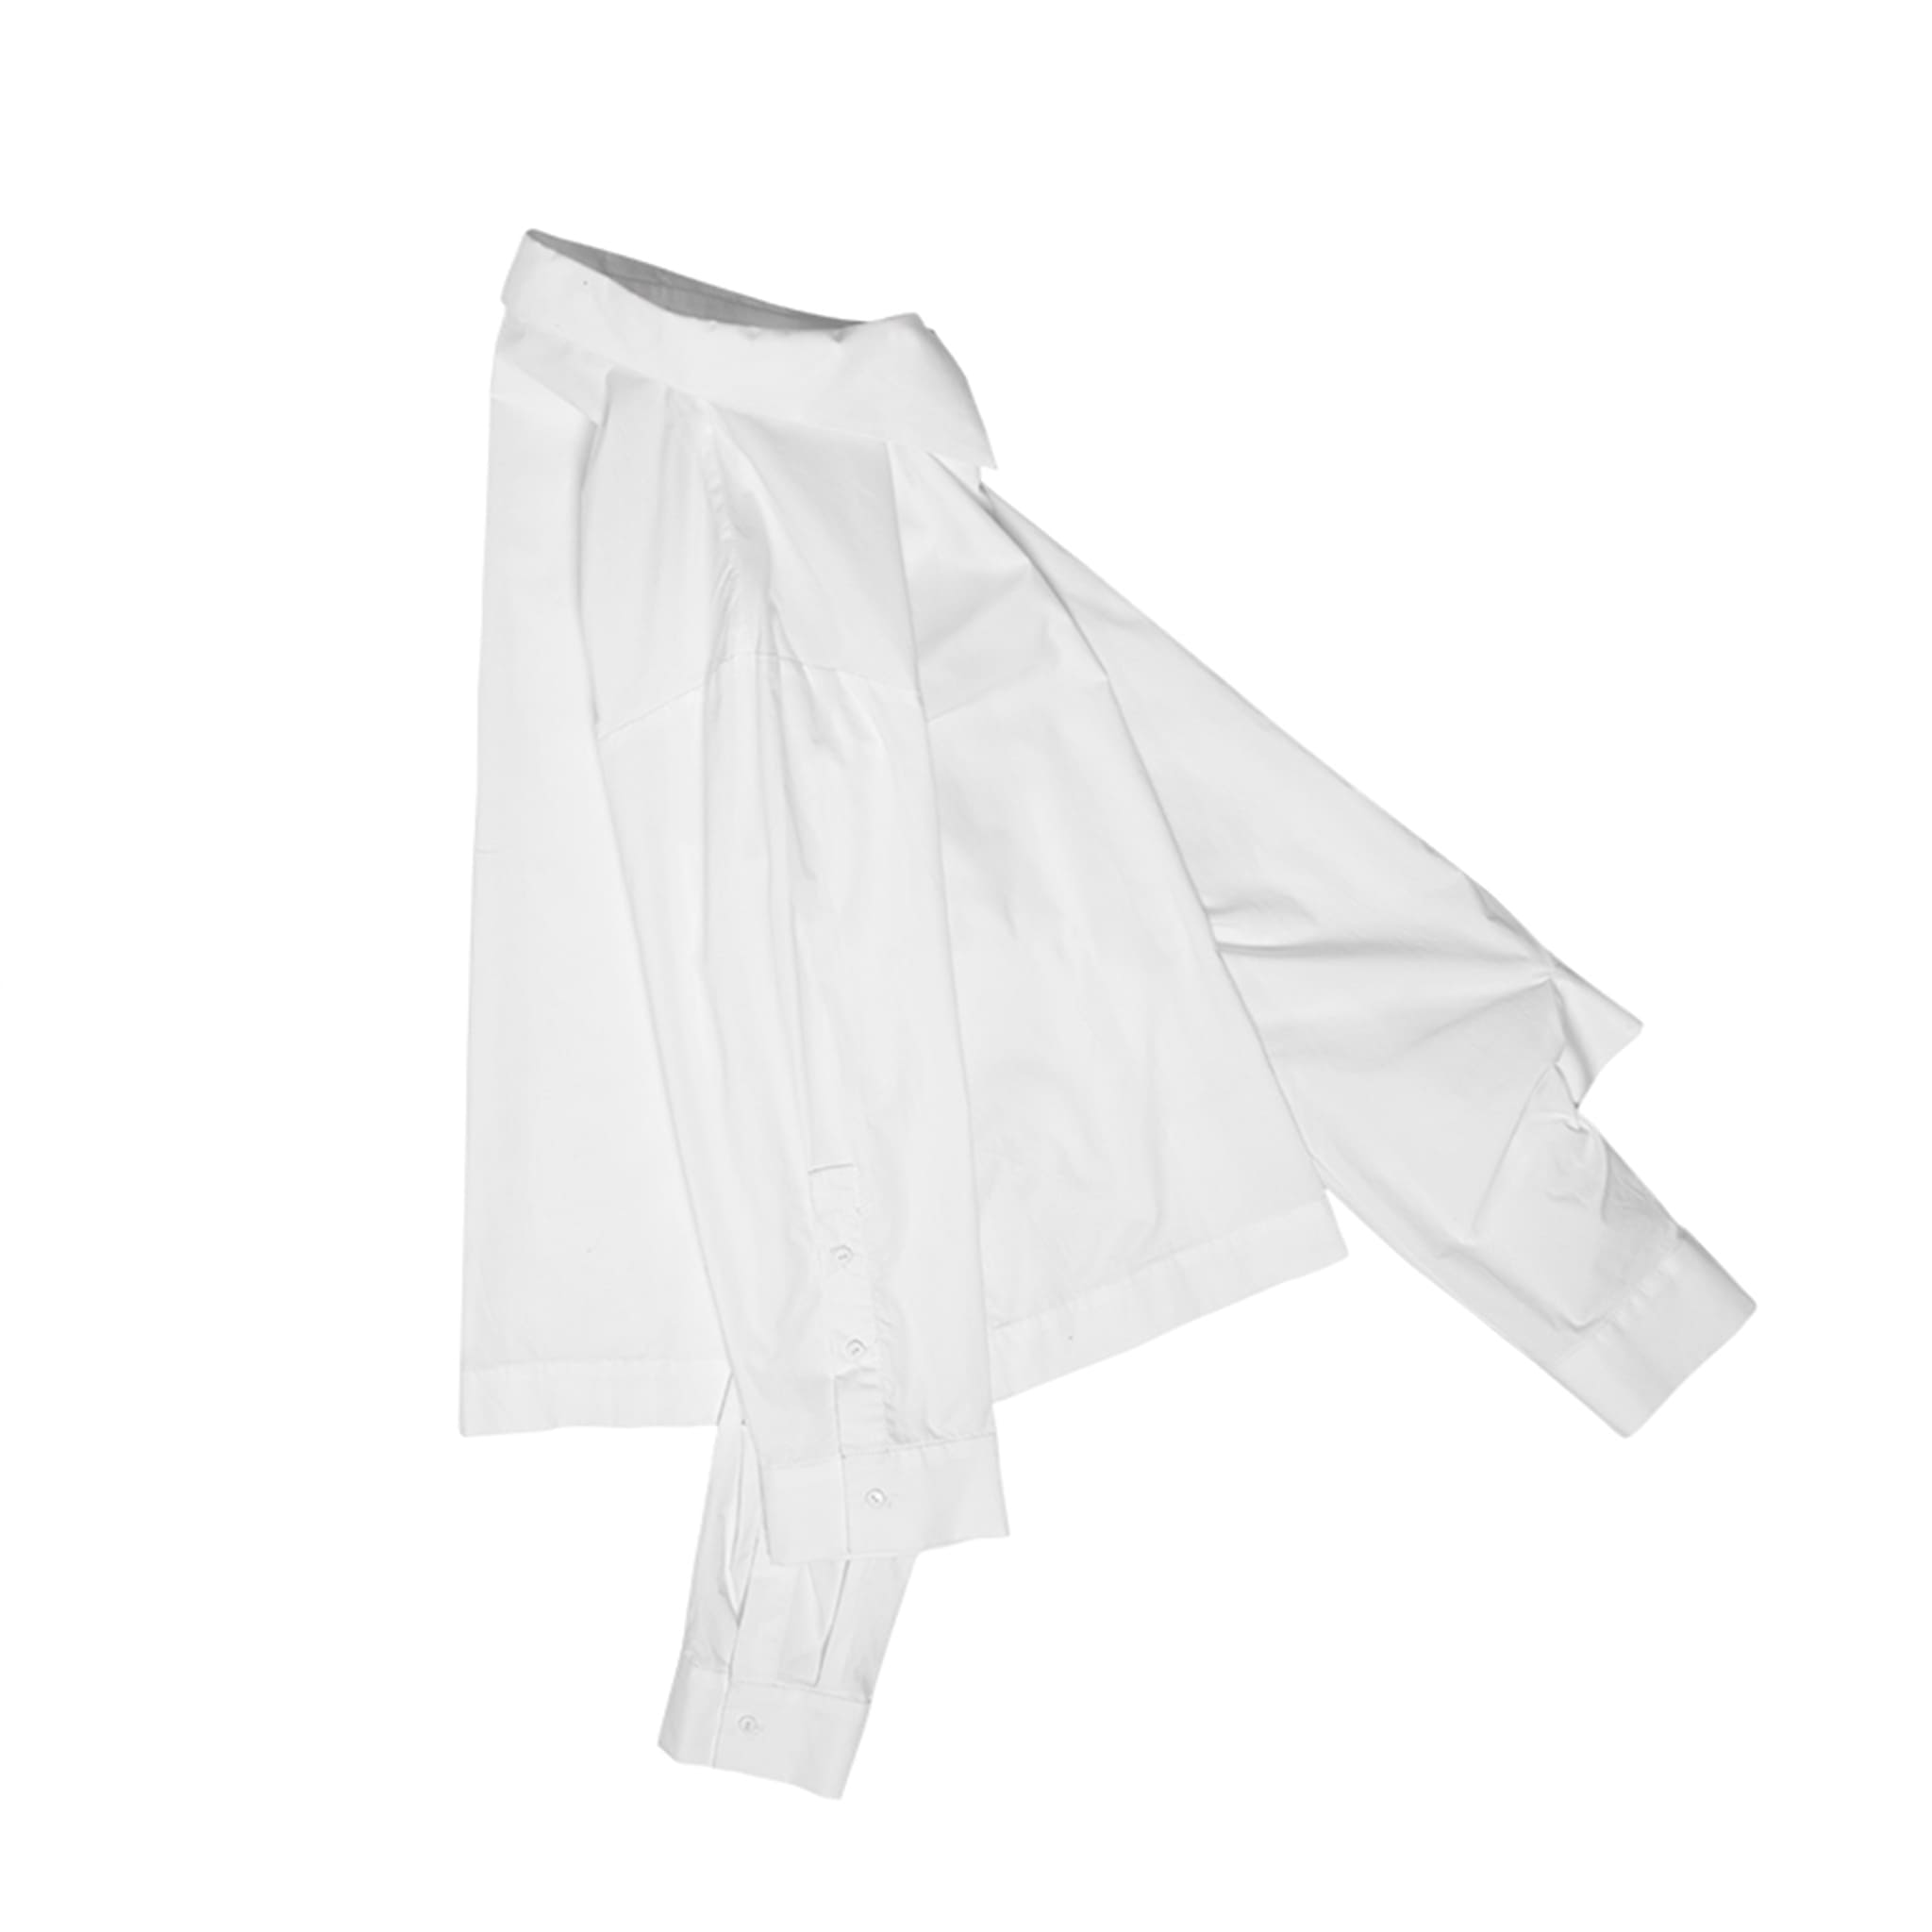 Double Sleeves Deconstructed Short Shirt